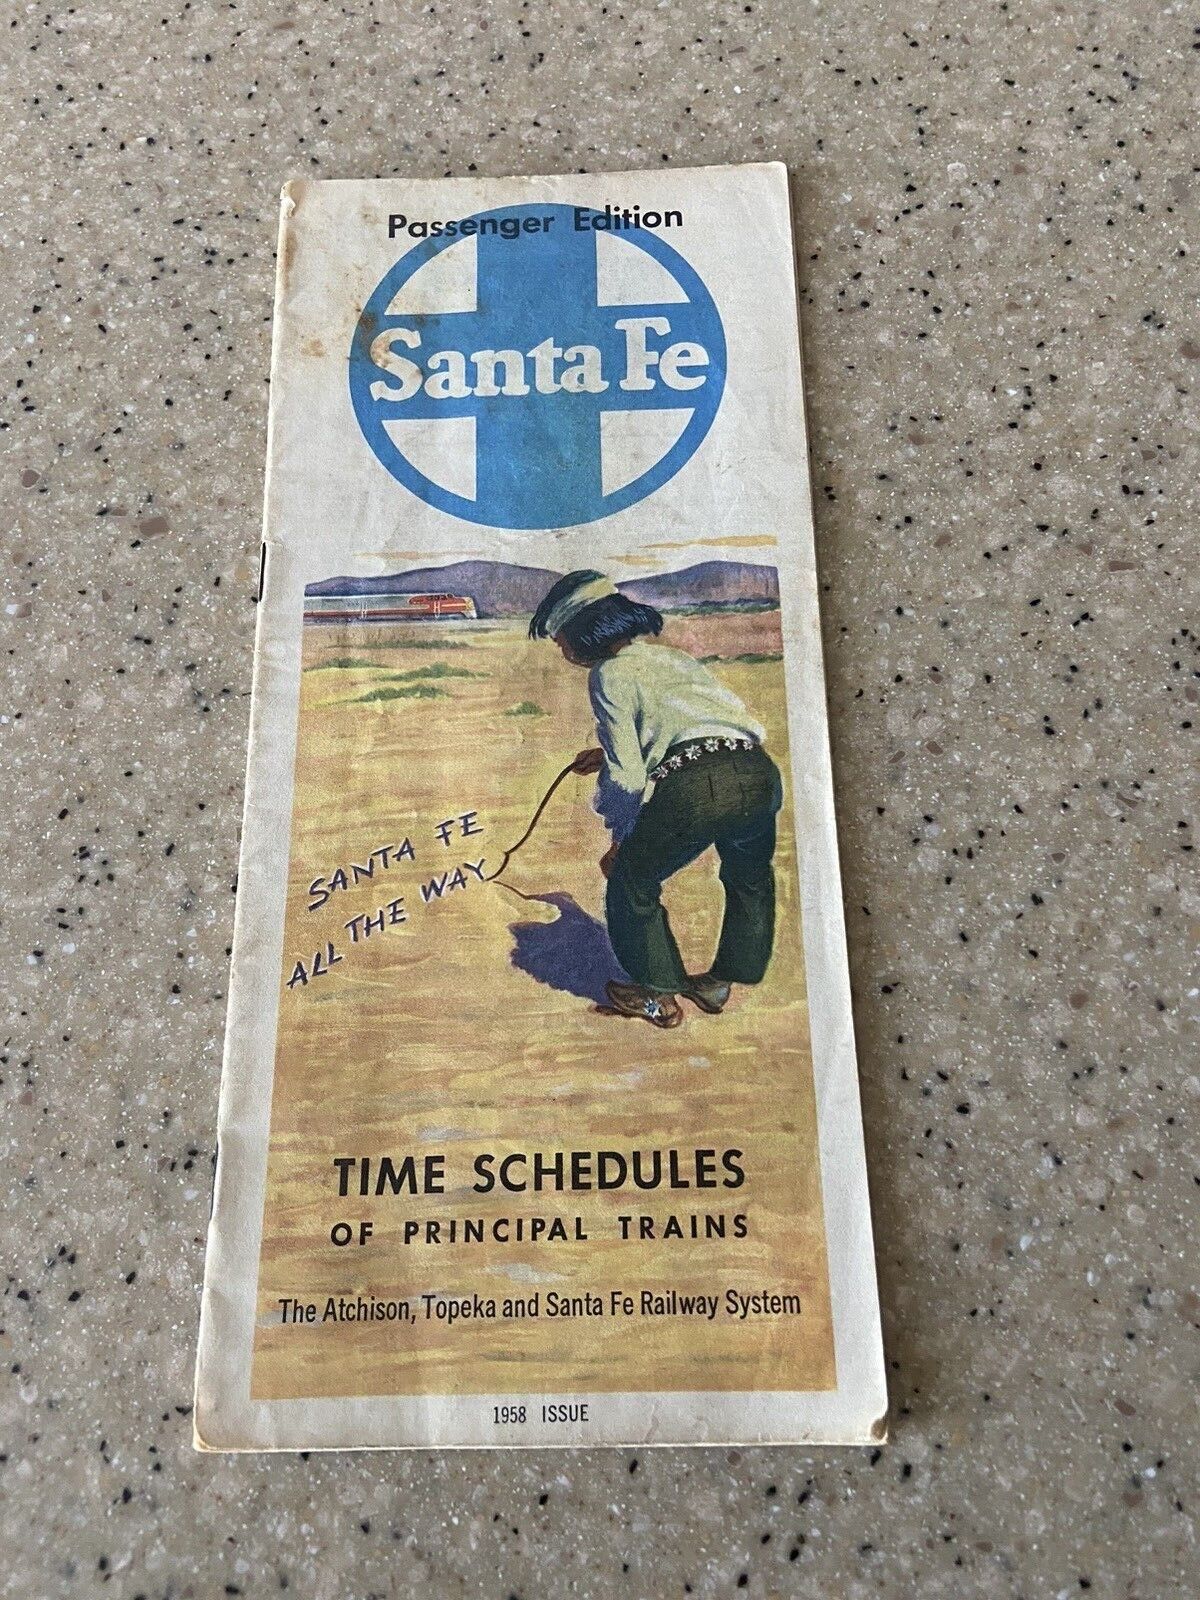 The Atchison Topeka & Sante Fe Railway January 12, 1958 Time Table